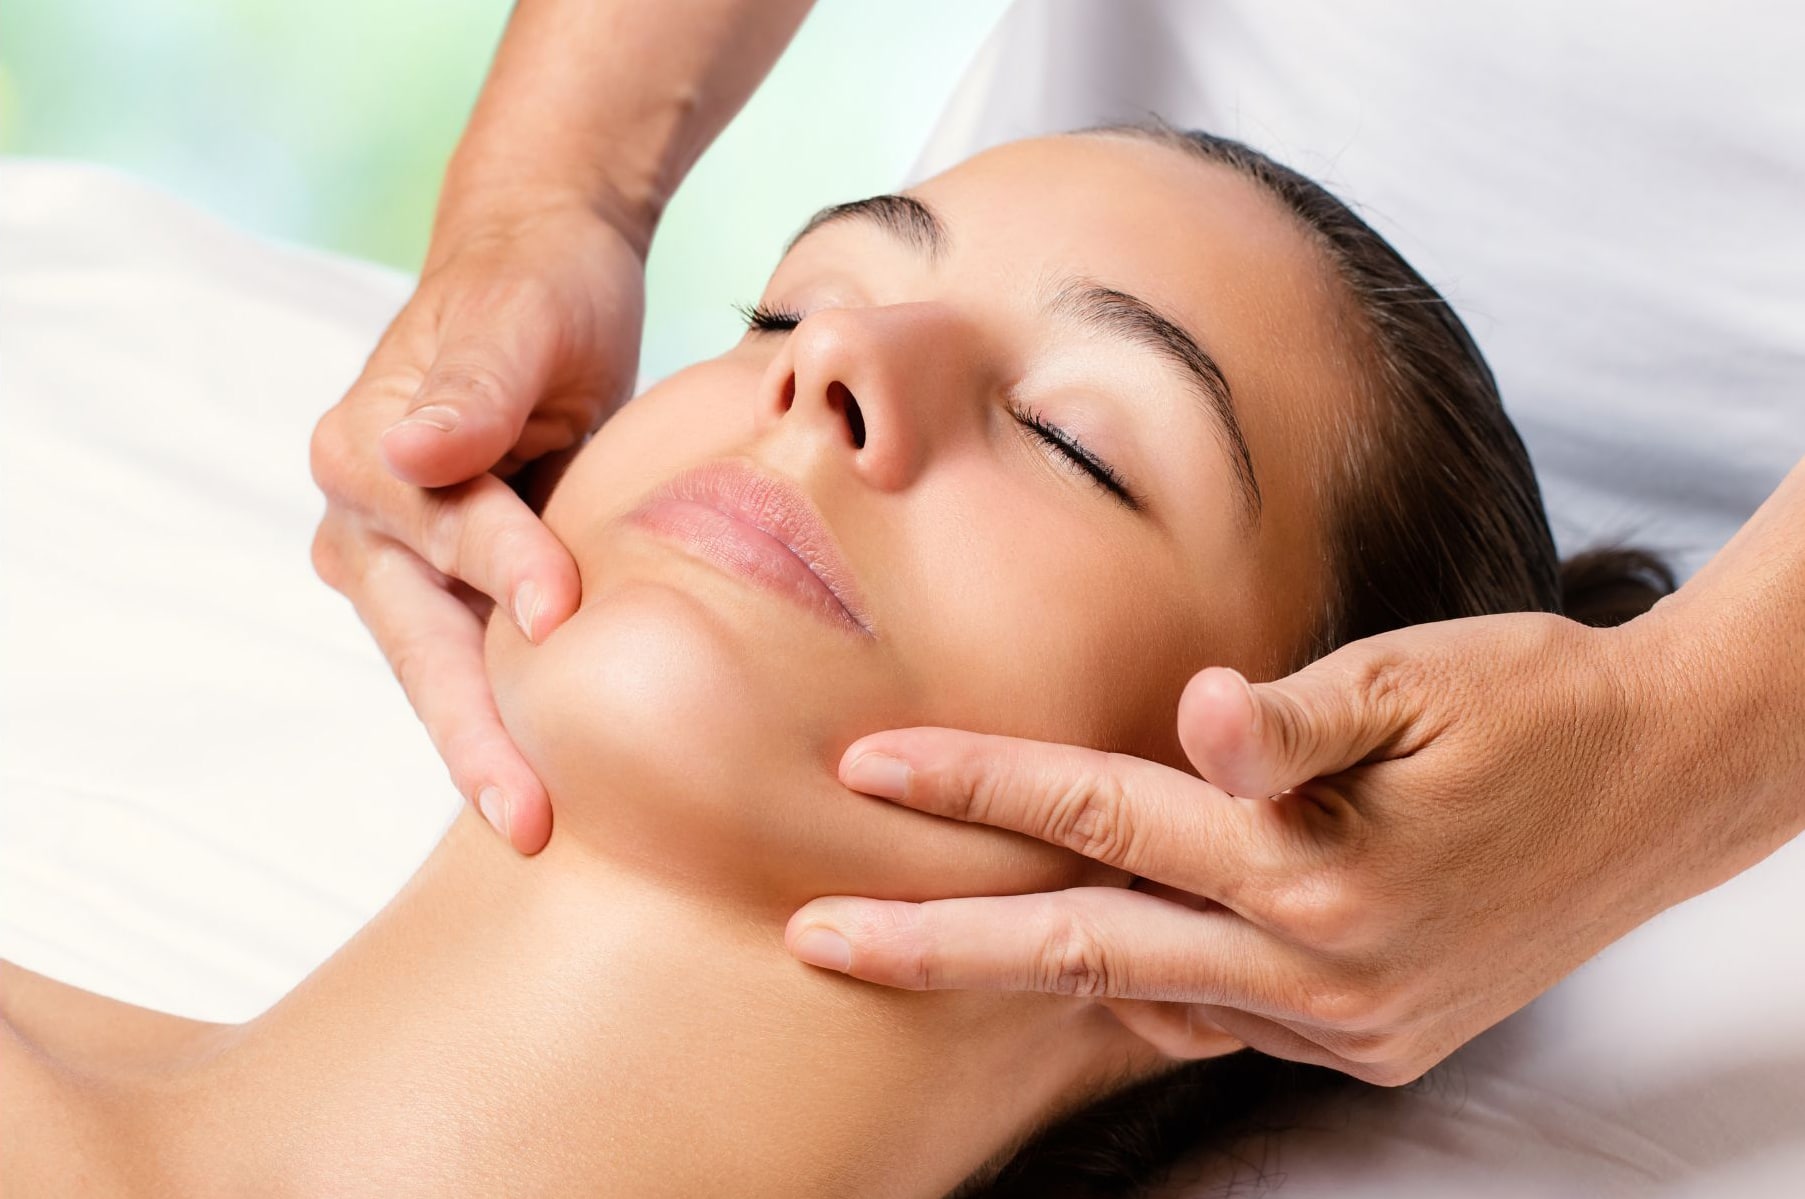 Woman on bed receiving a facial massage